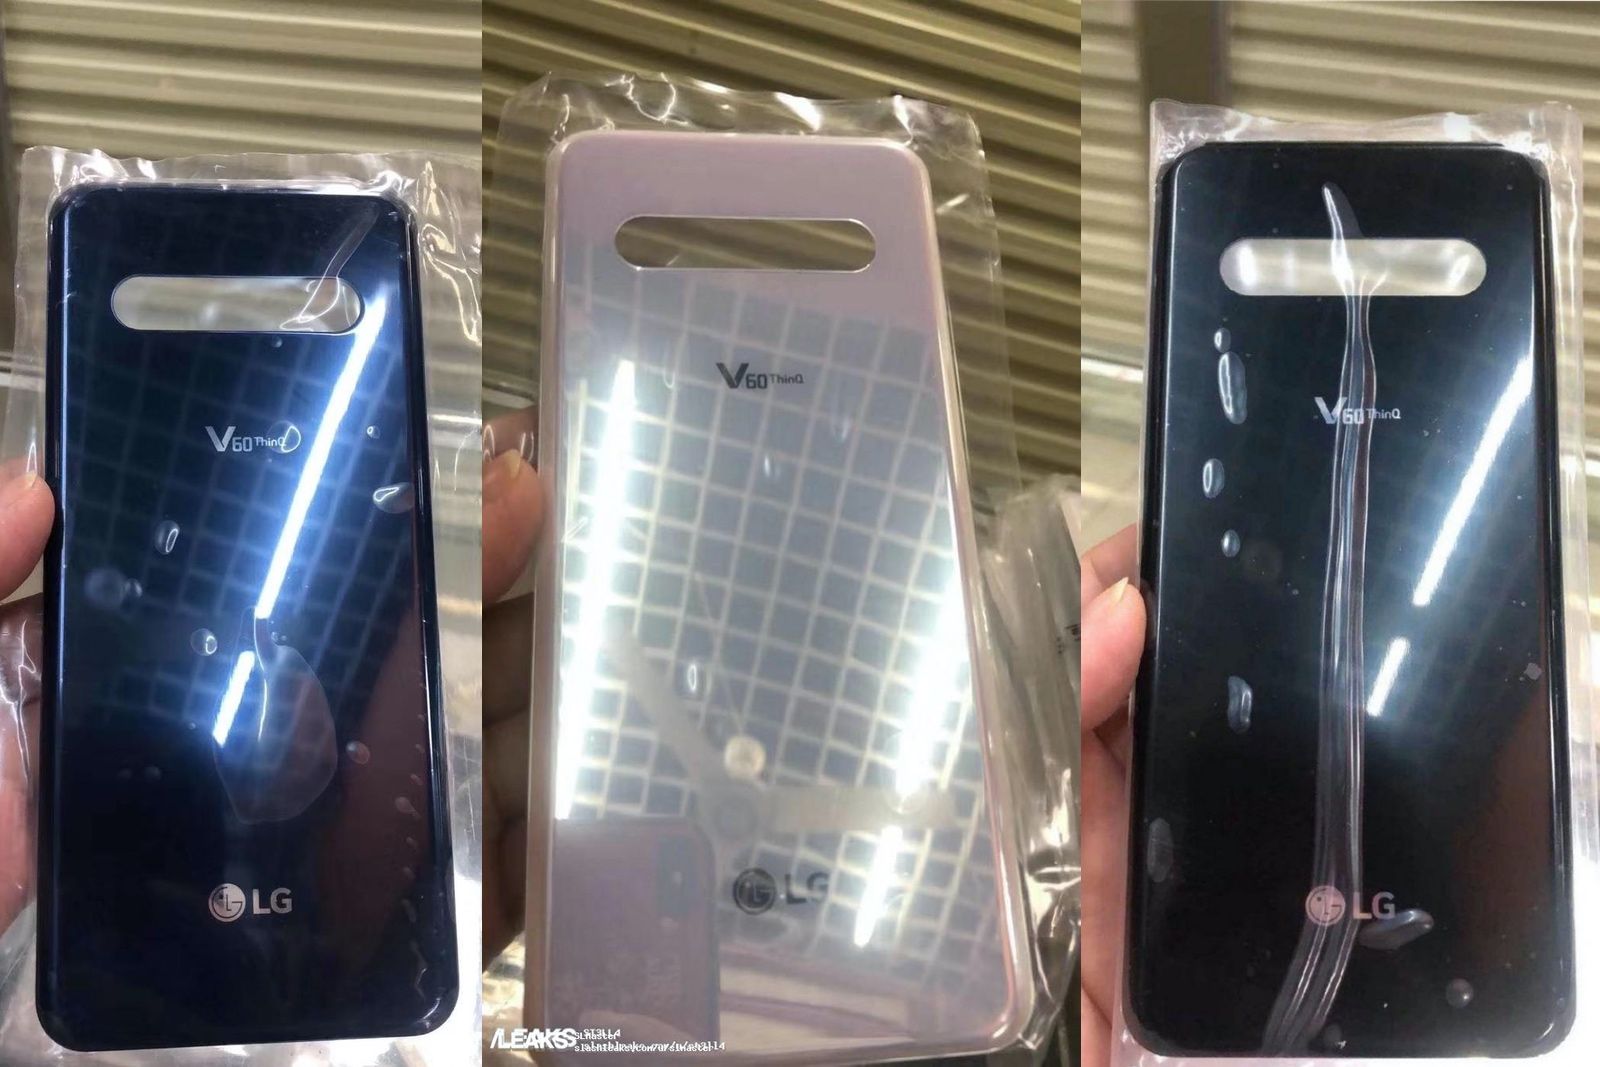 Lgs New V60 Thinq Phones May Have Just Had Their Backs Leaked image 1